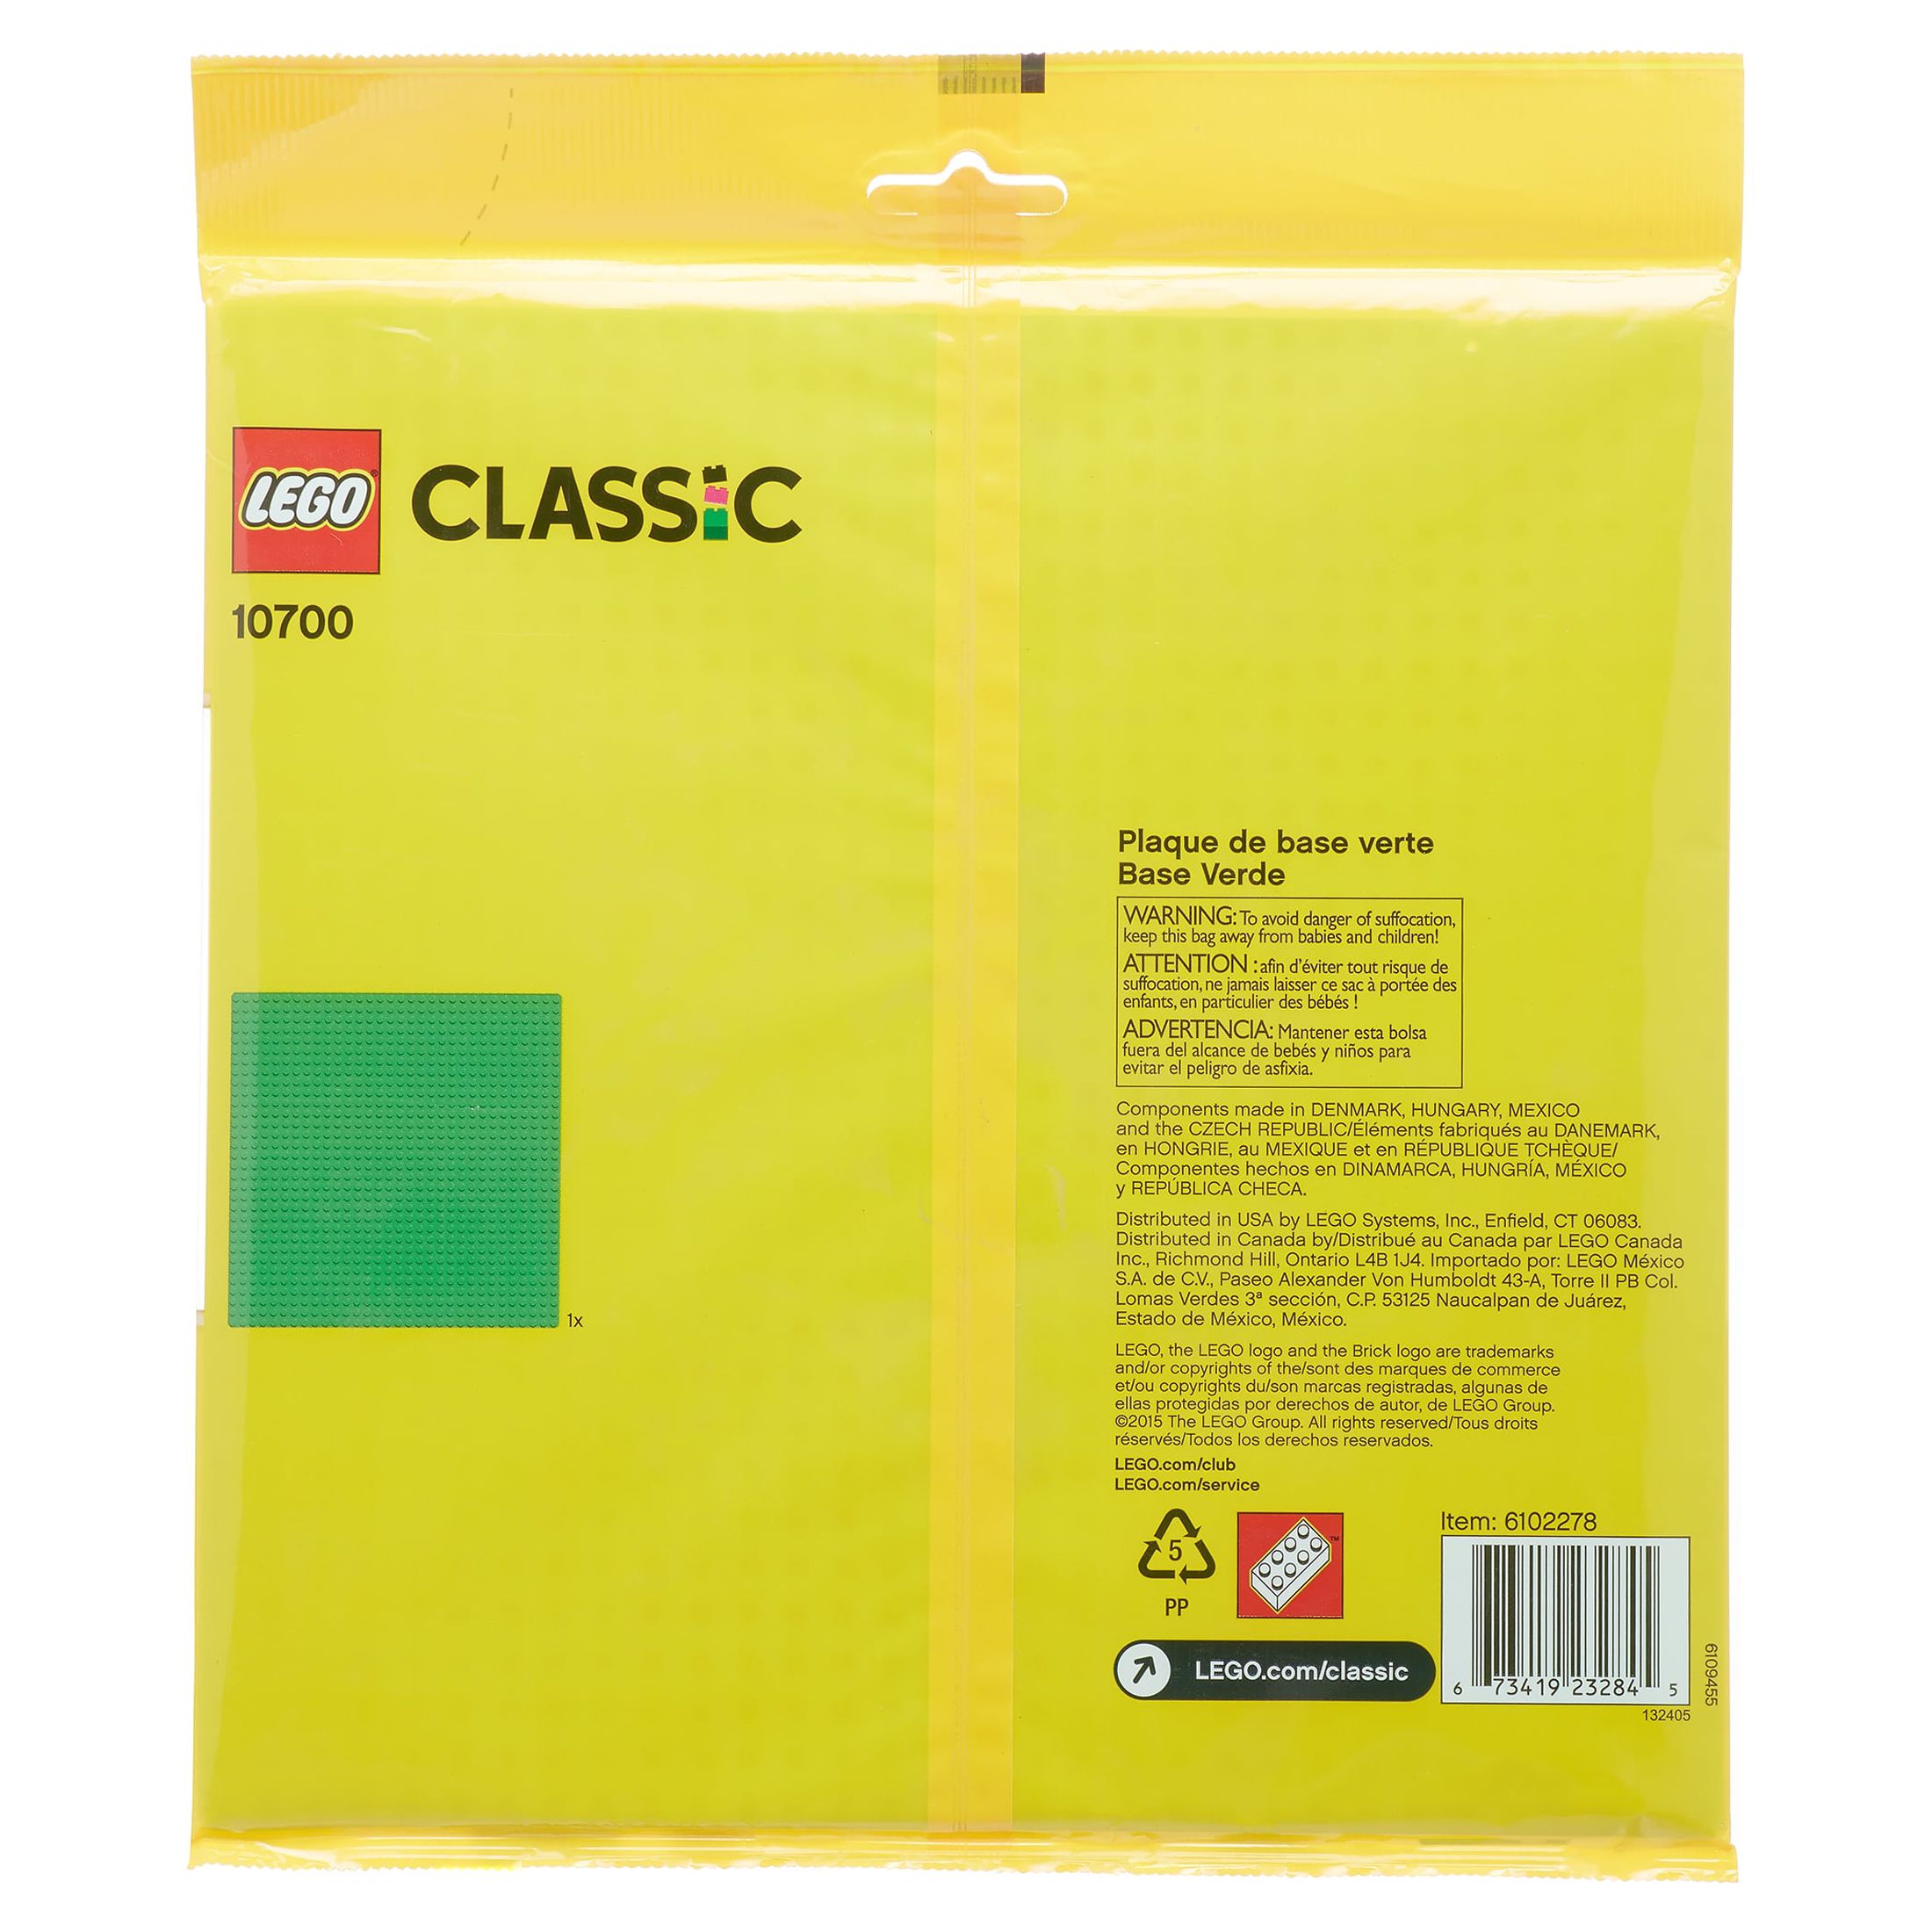 LEGO Classic Green Baseplate 10700 Building Accessory (1 Piece) - image 5 of 6